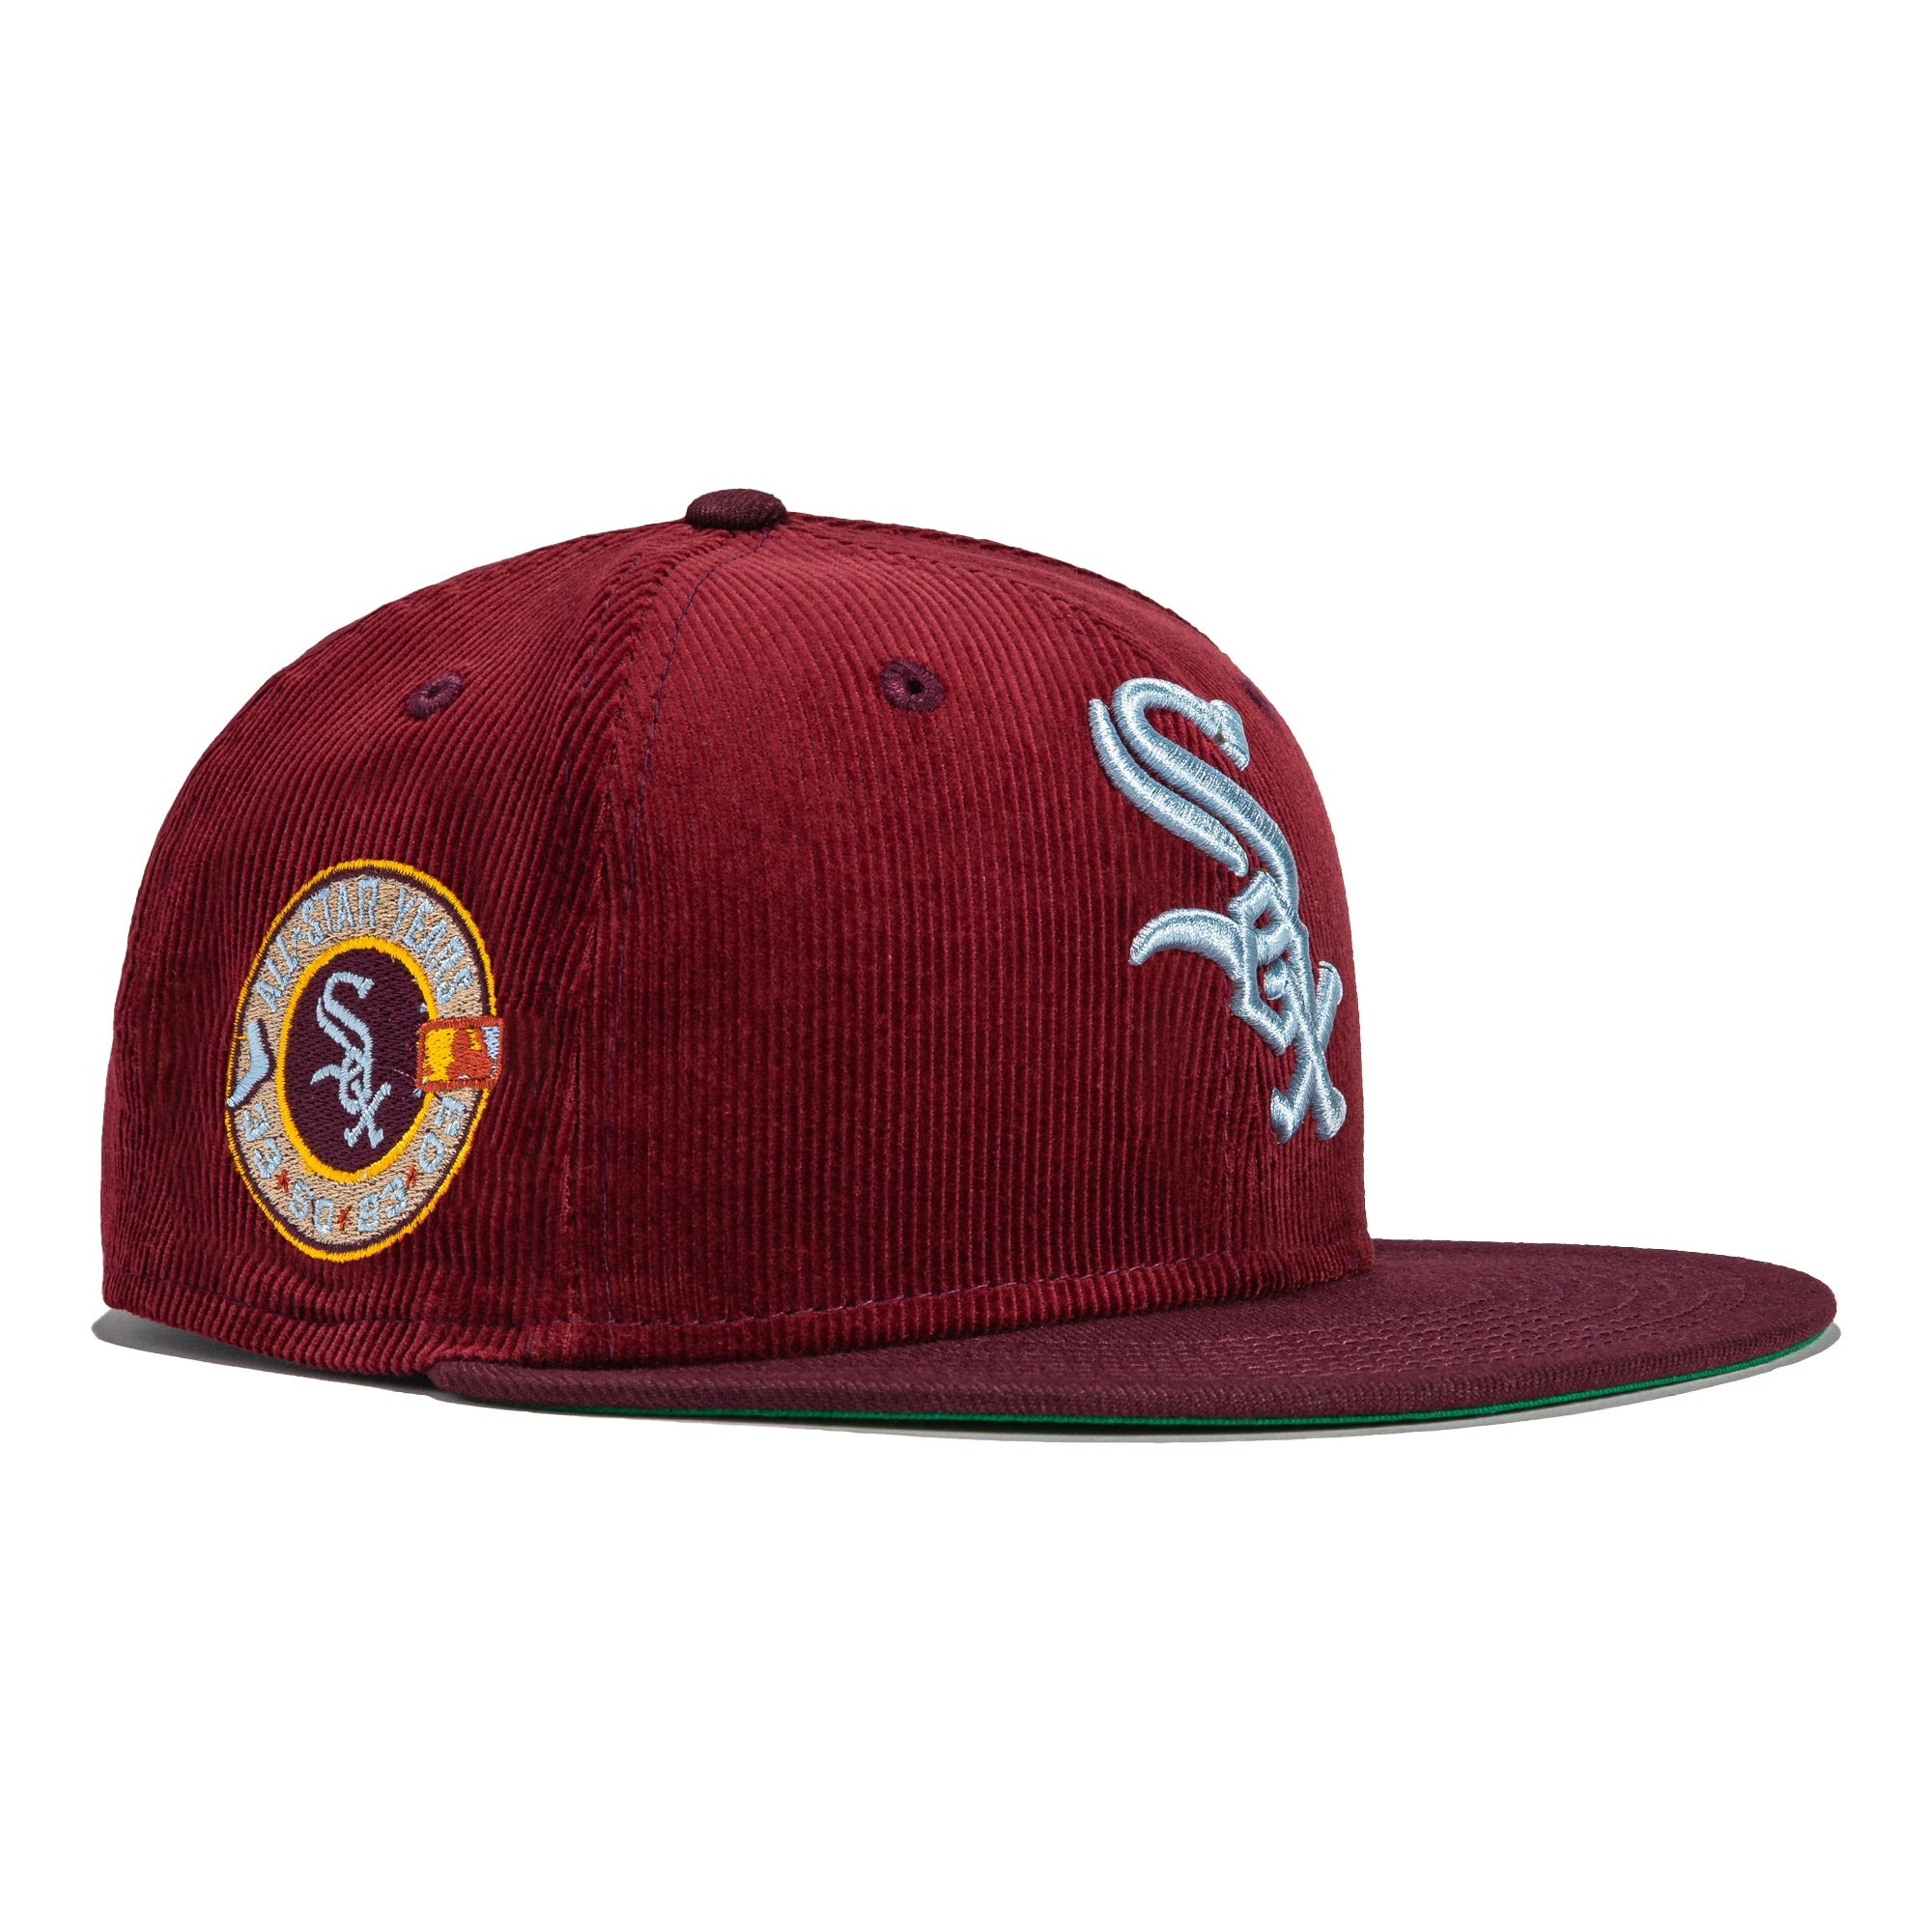 Corduroy Dreams 2022 Fitted Hats